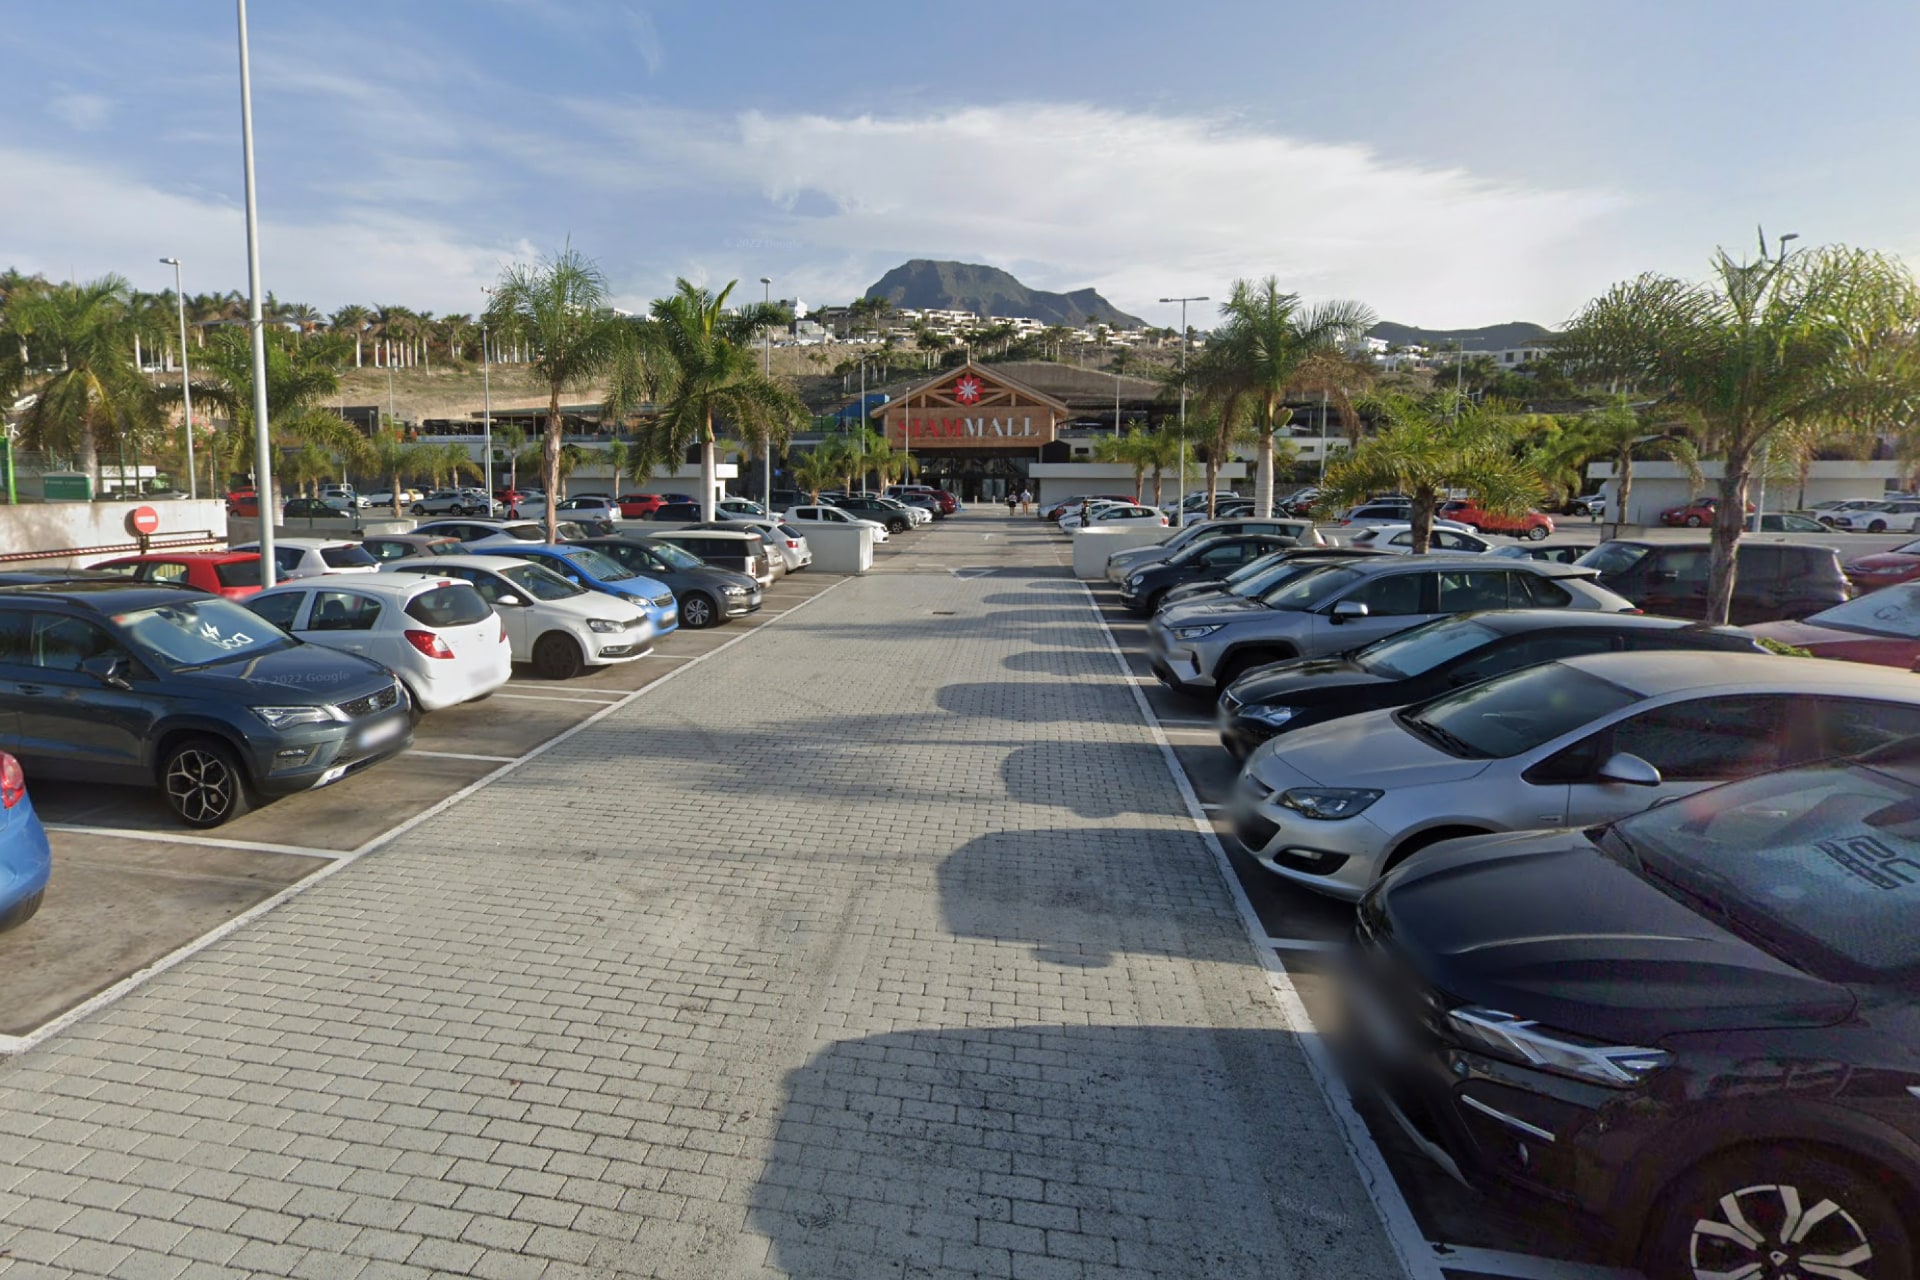 Ample parking facility at Siam Mall, Tenerife, offering convenient parking options for shoppers and visitors